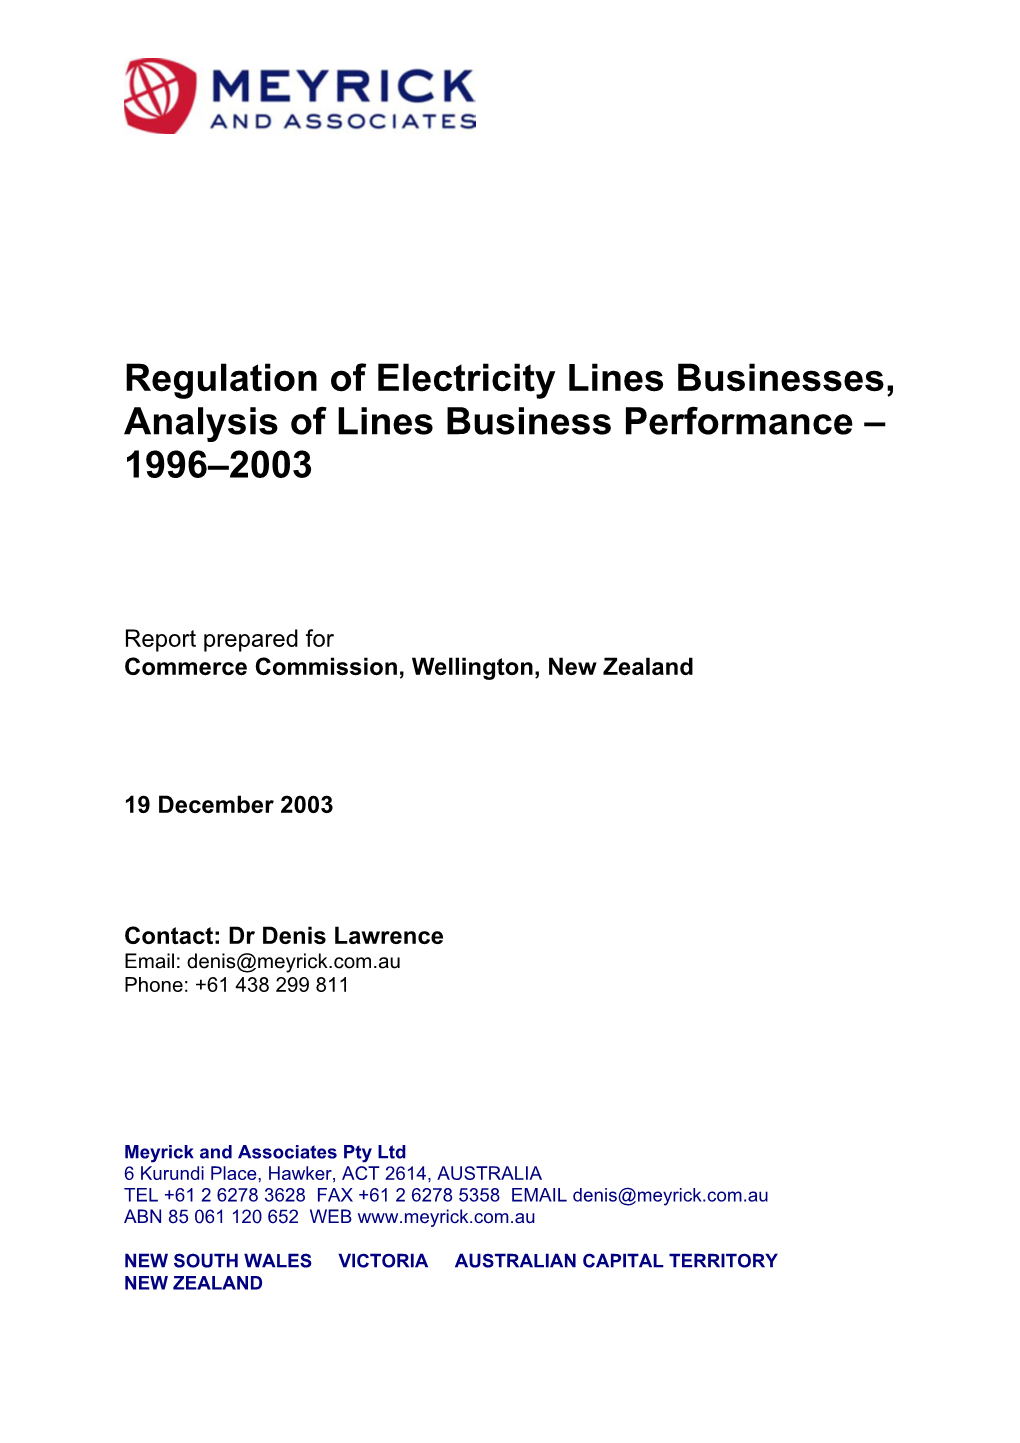 Regulation of Electricity Lines Businesses, Analysis of Lines Business Performance – 1996–2003